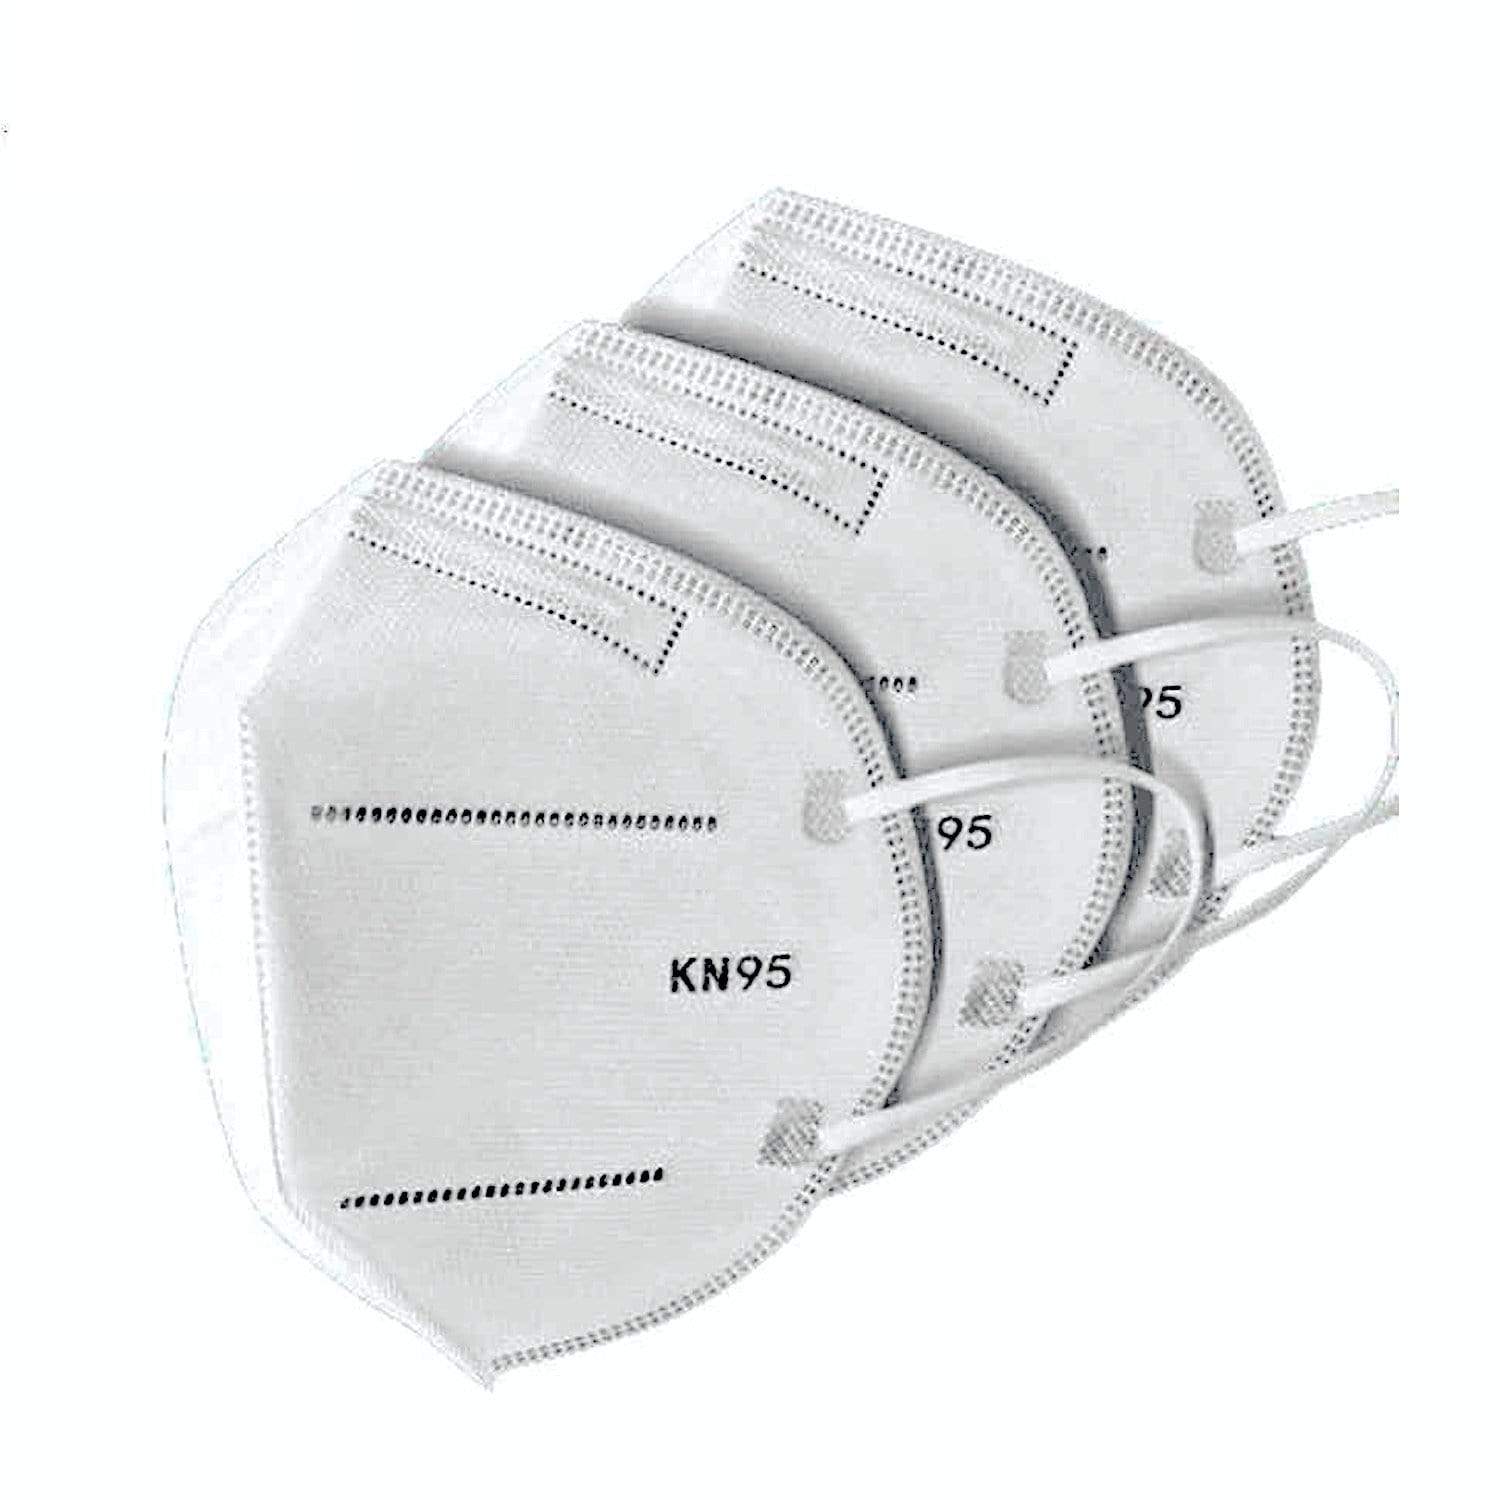 5 pcs 5-Layer KN95 Face Masks Protective Covers CARE_MASK02